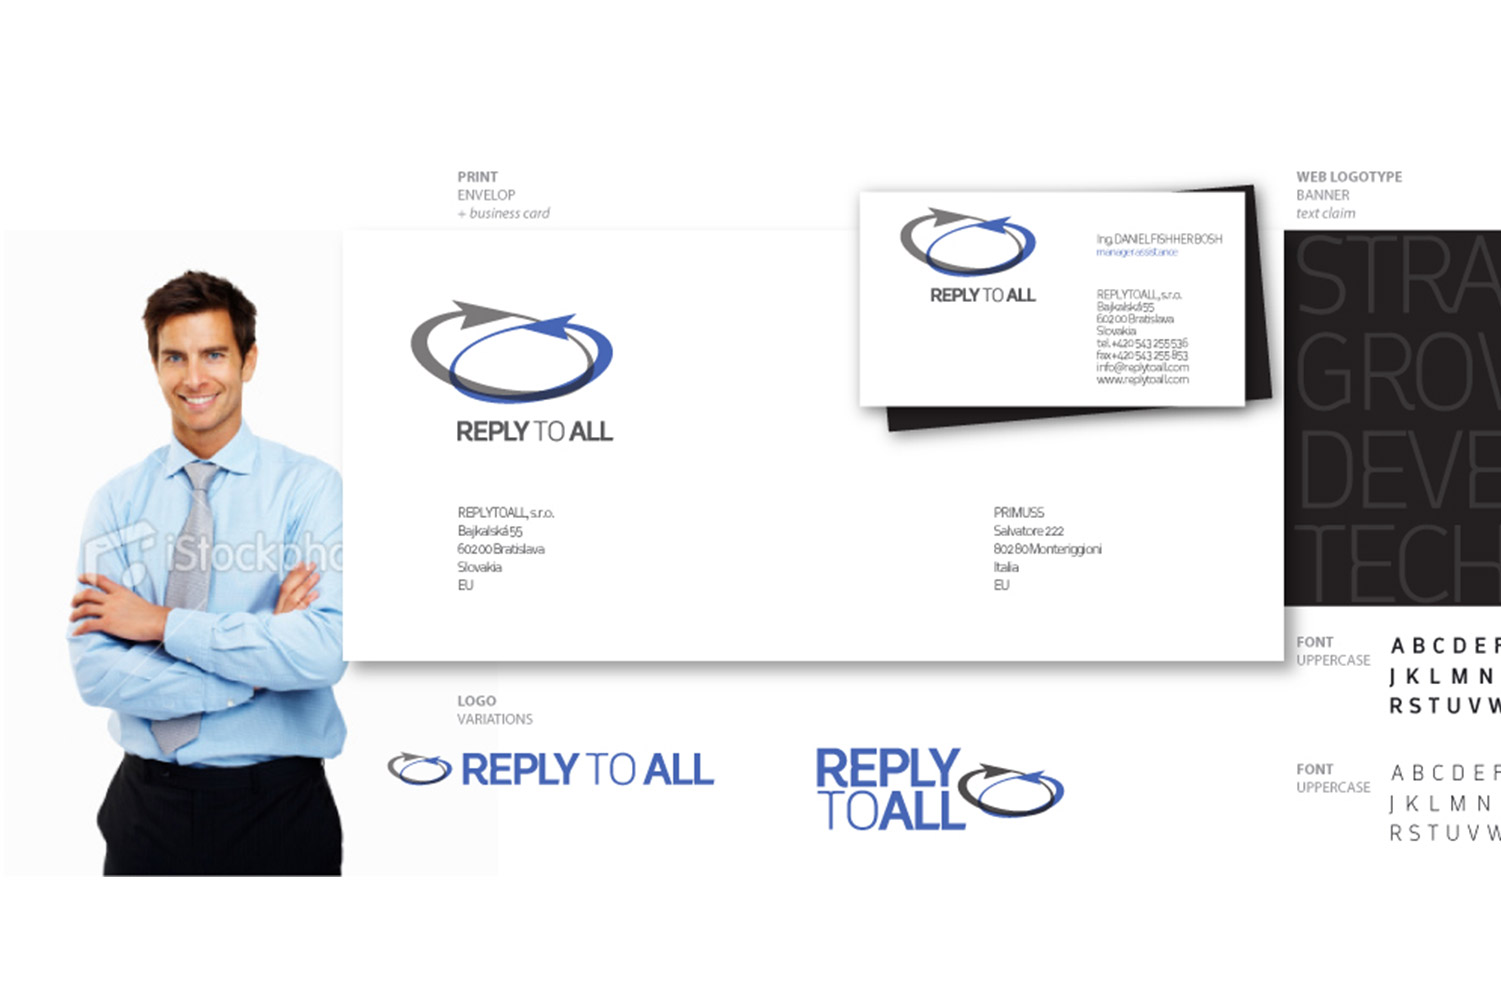 Reply to all, Corporate Identity image